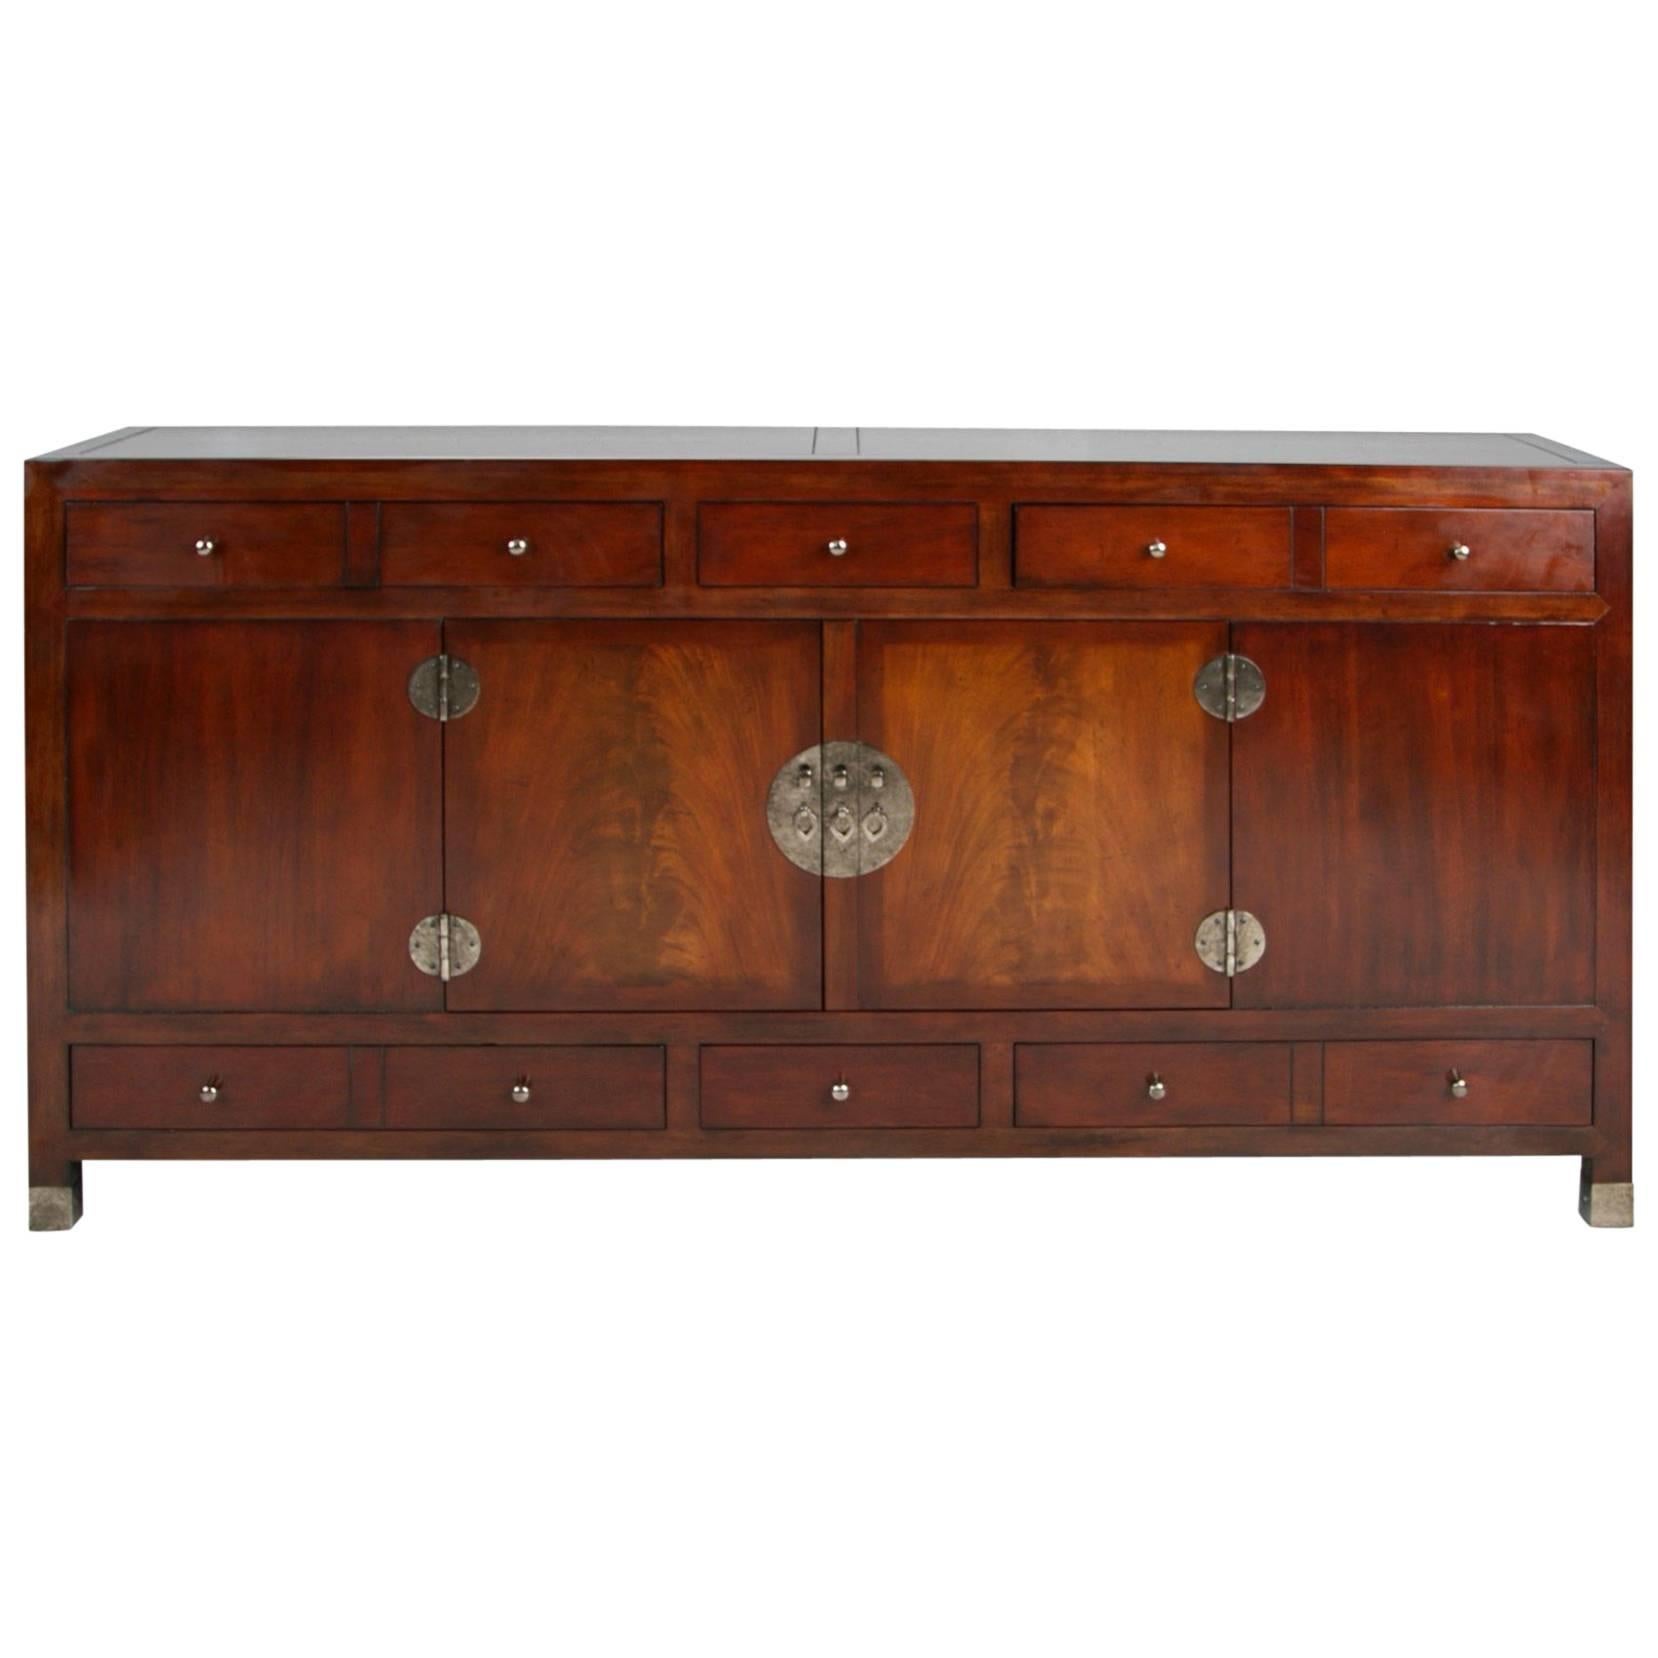 Signed Baker Milling Road Mahogany Ming Sideboard with Hidden Compartments